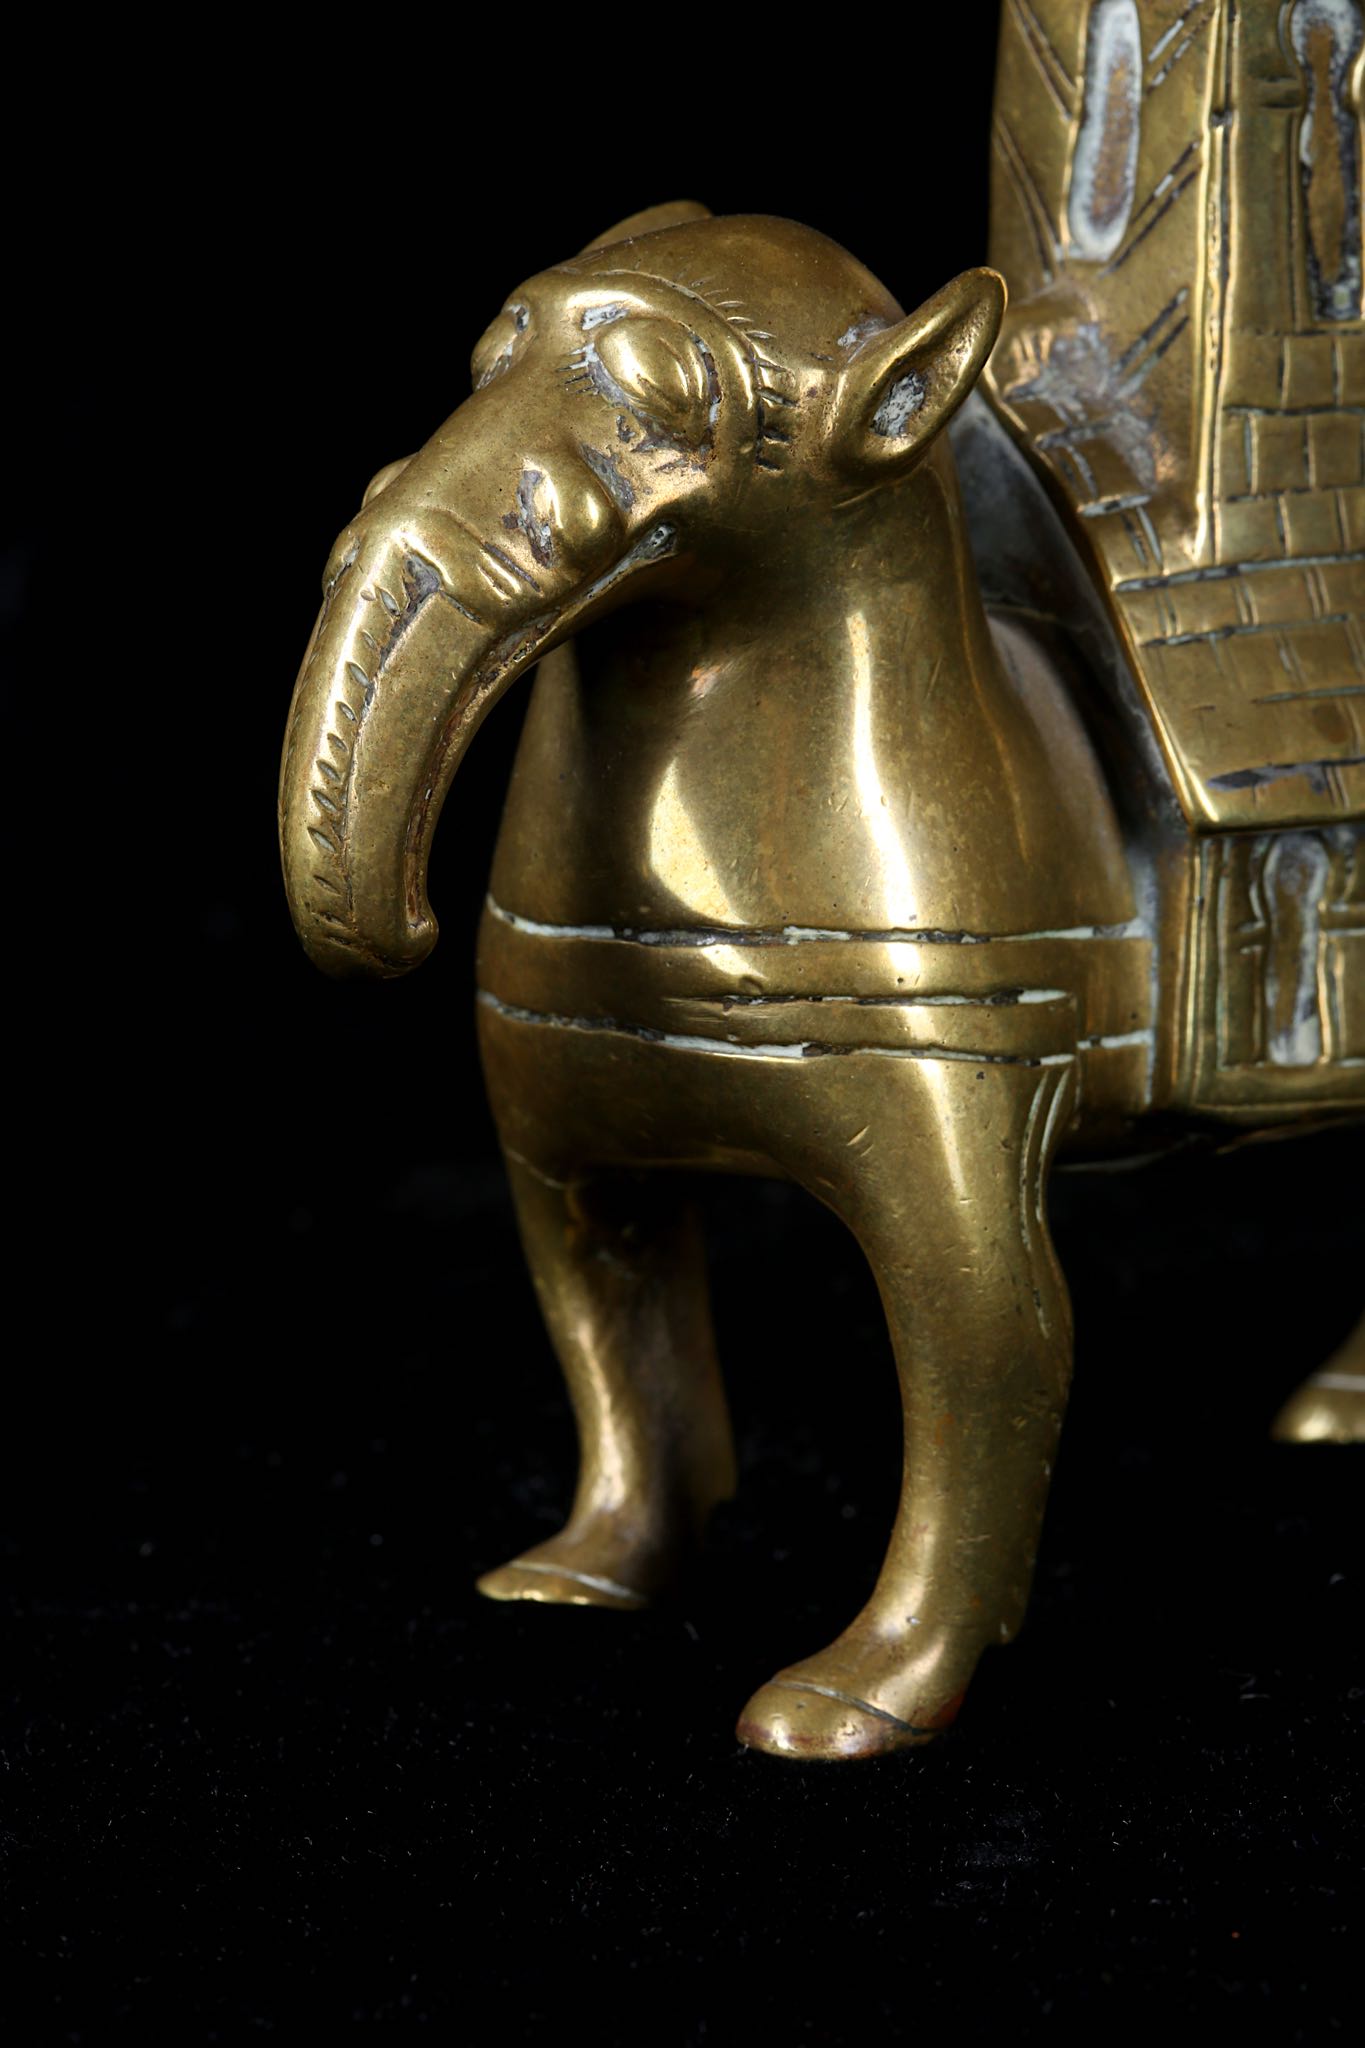 A MAGDEBURG STYLE BRONZE CANDLESTICK IN THE FORM OF AN ELEPHANT AND CASTLE, PROBABLY 19TH CENTURY - Image 7 of 8